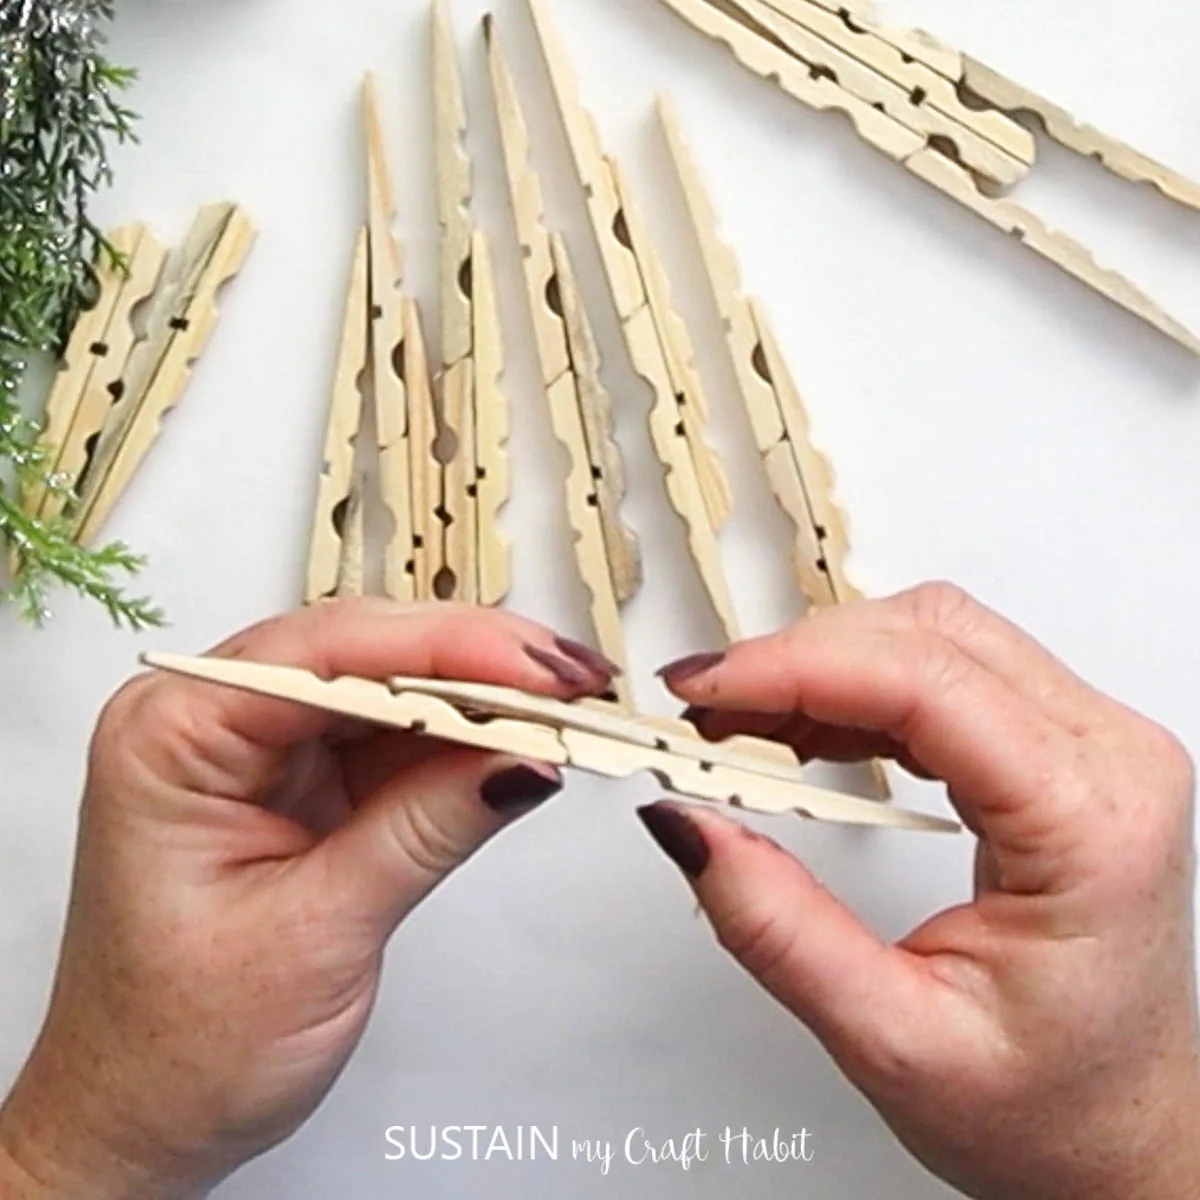 Attaching clothespins together.